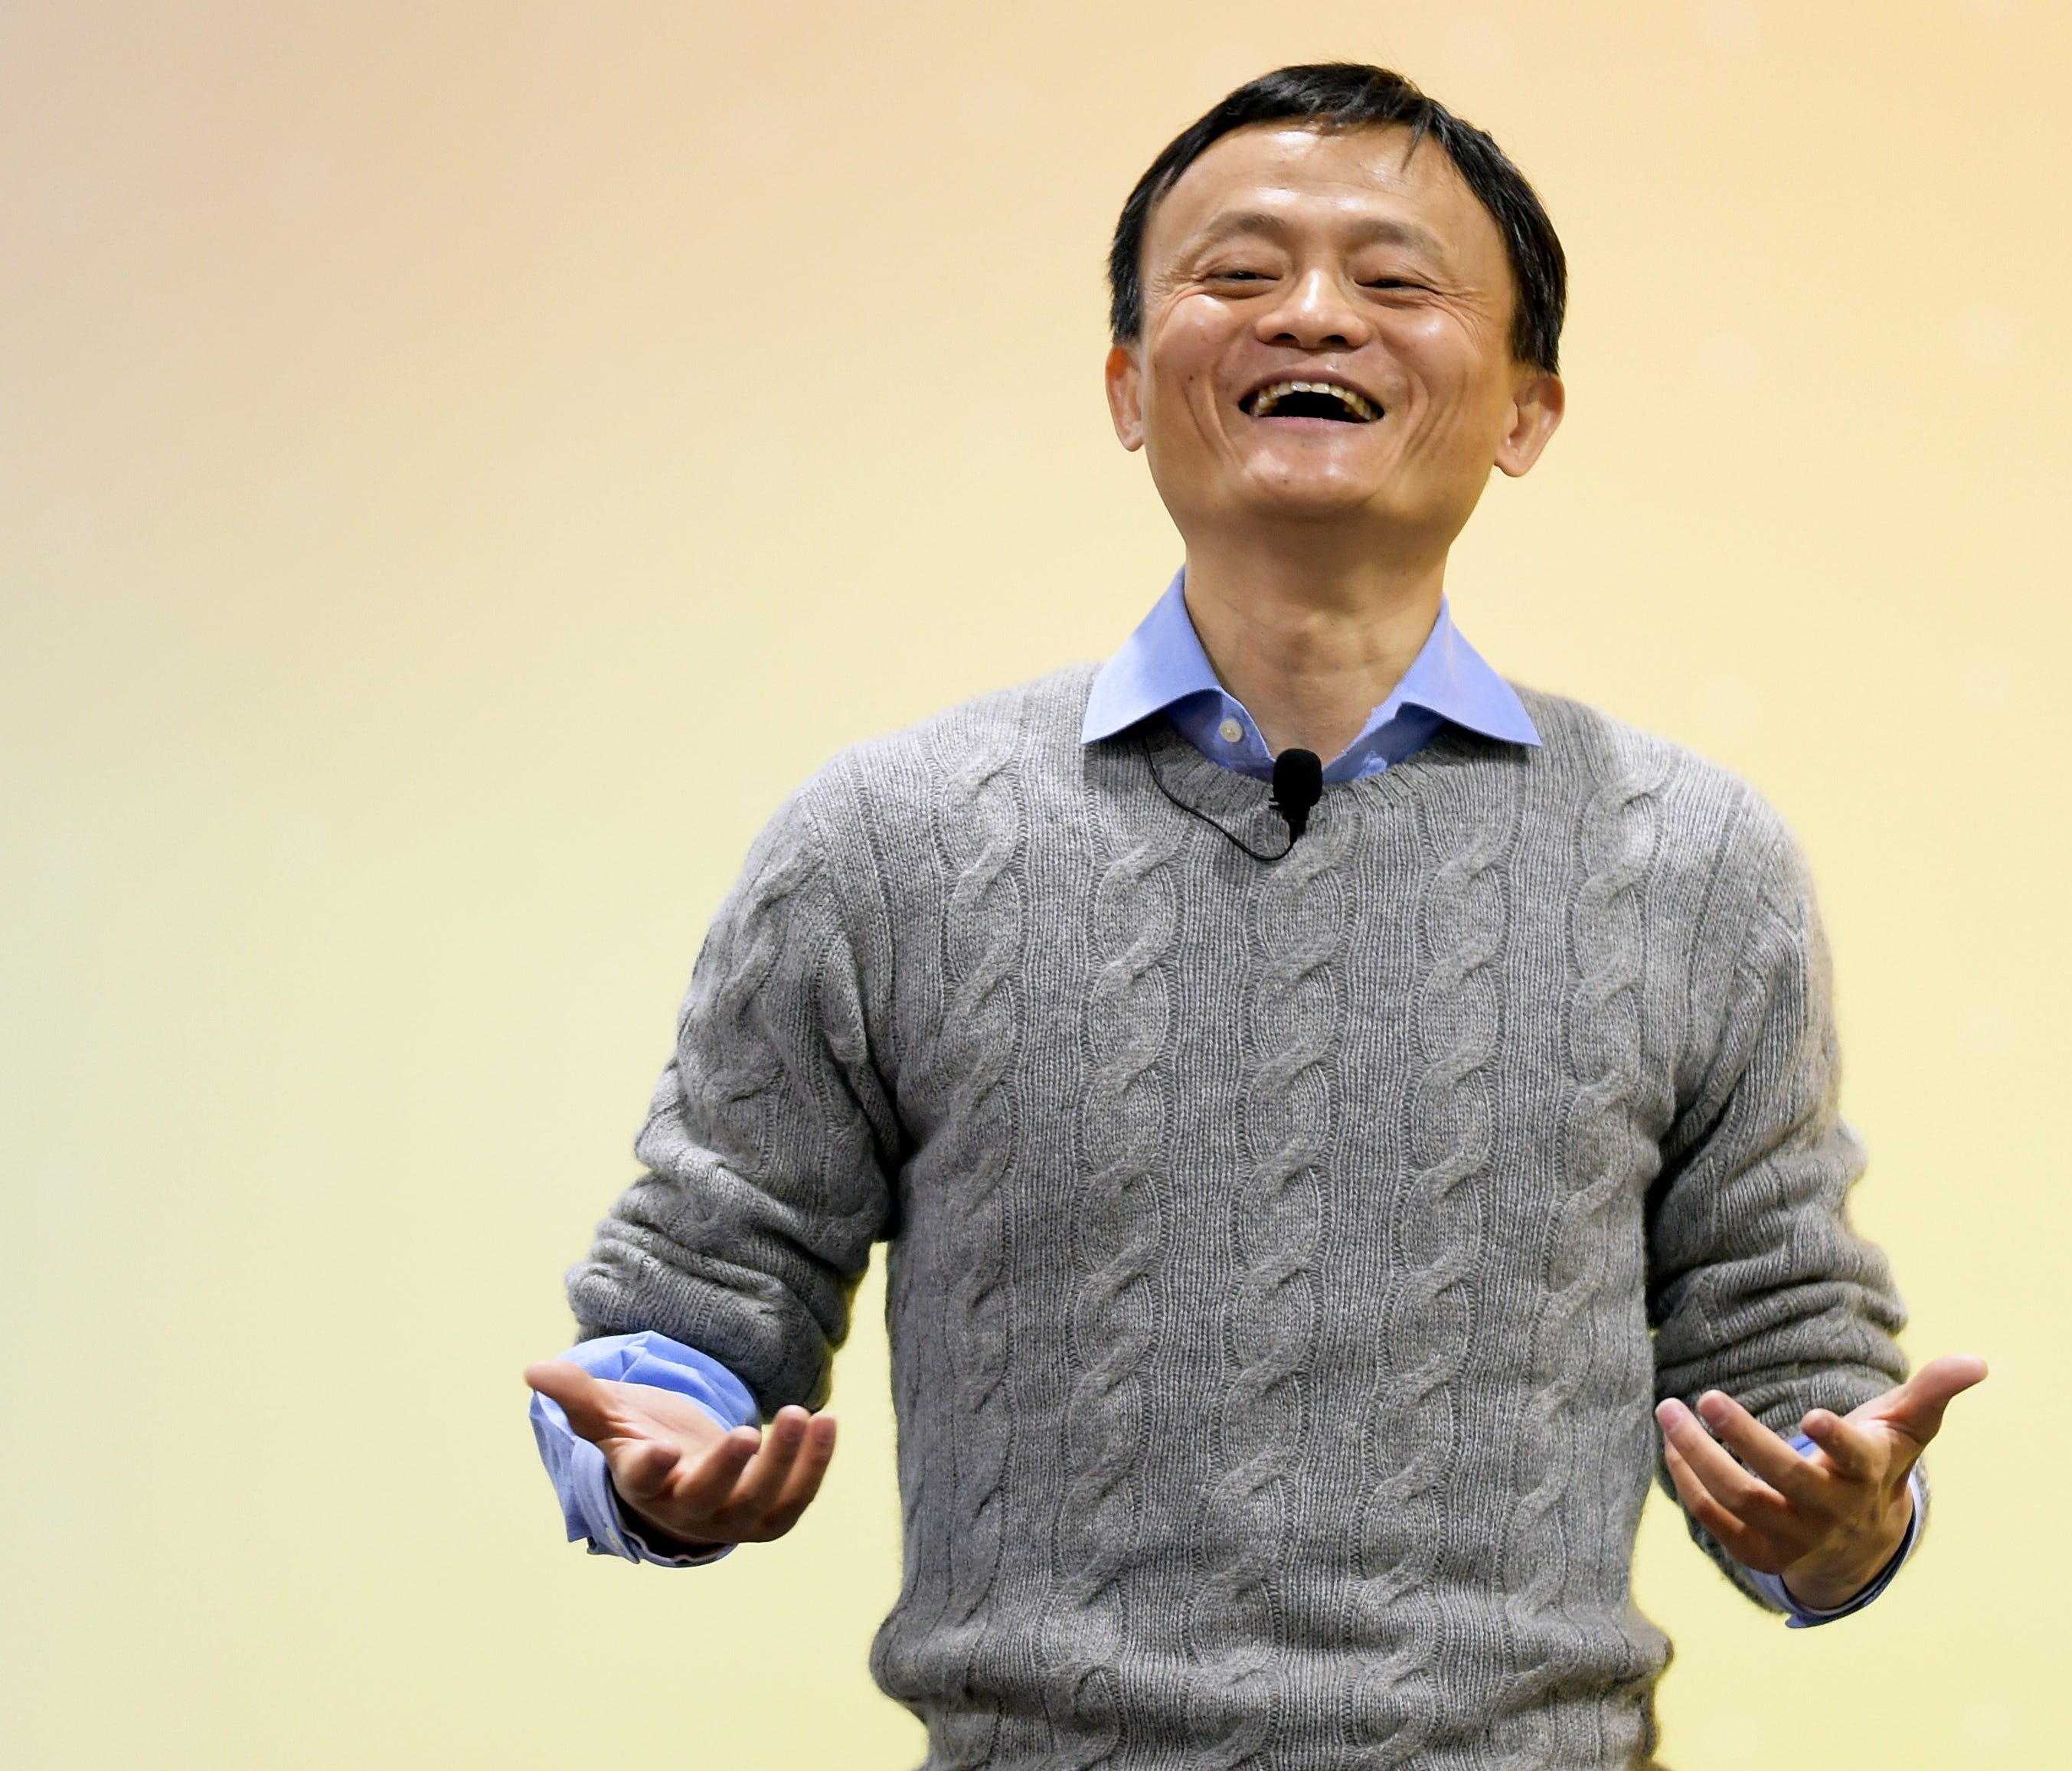 A file picture taken on March 3, 2015 shows Jack Ma, founder and executive chairman of Alibaba Group, making a speech at the National Taiwan University (NTU) in Taipei.